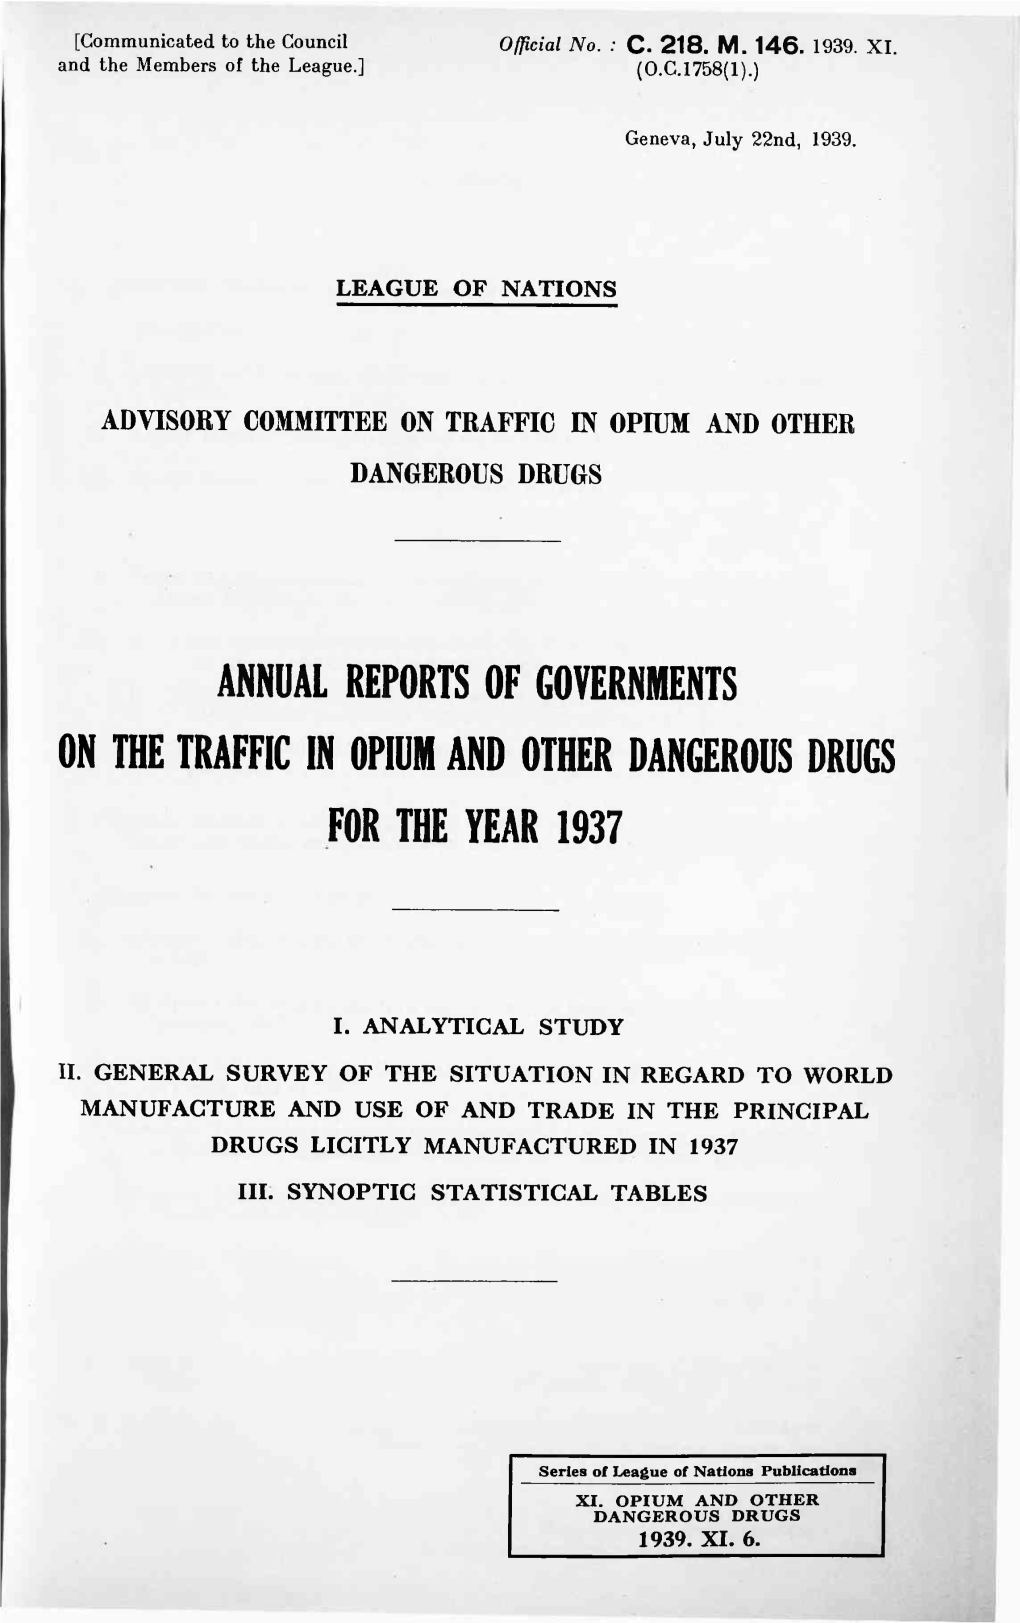 Annual Reports of Governments on the Traffic in Opium and Other Dangerous Drugs for the Year 1 9 3 7